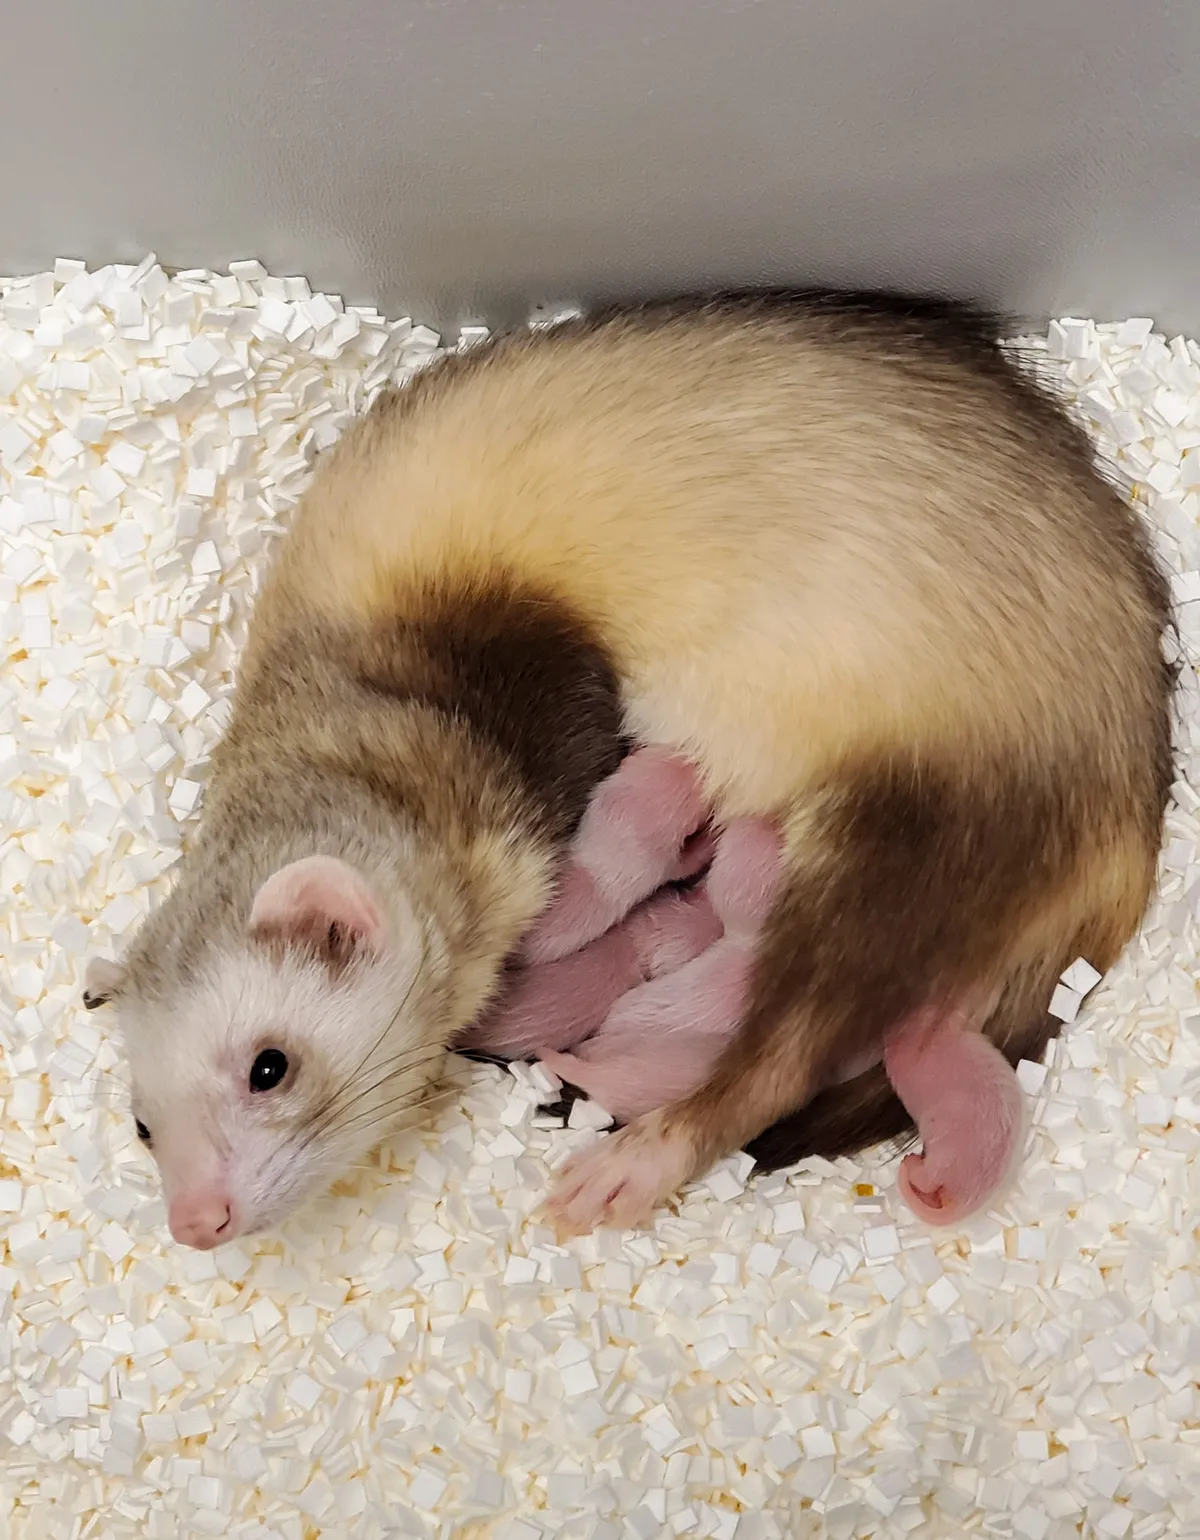 Elizabeth Ann, the first cloned black-footed ferret and first-ever cloned U.S. endangered species, with her domestic ferret siblings and surrogate mother © USFWS National Black-footed Ferret Conservation Center